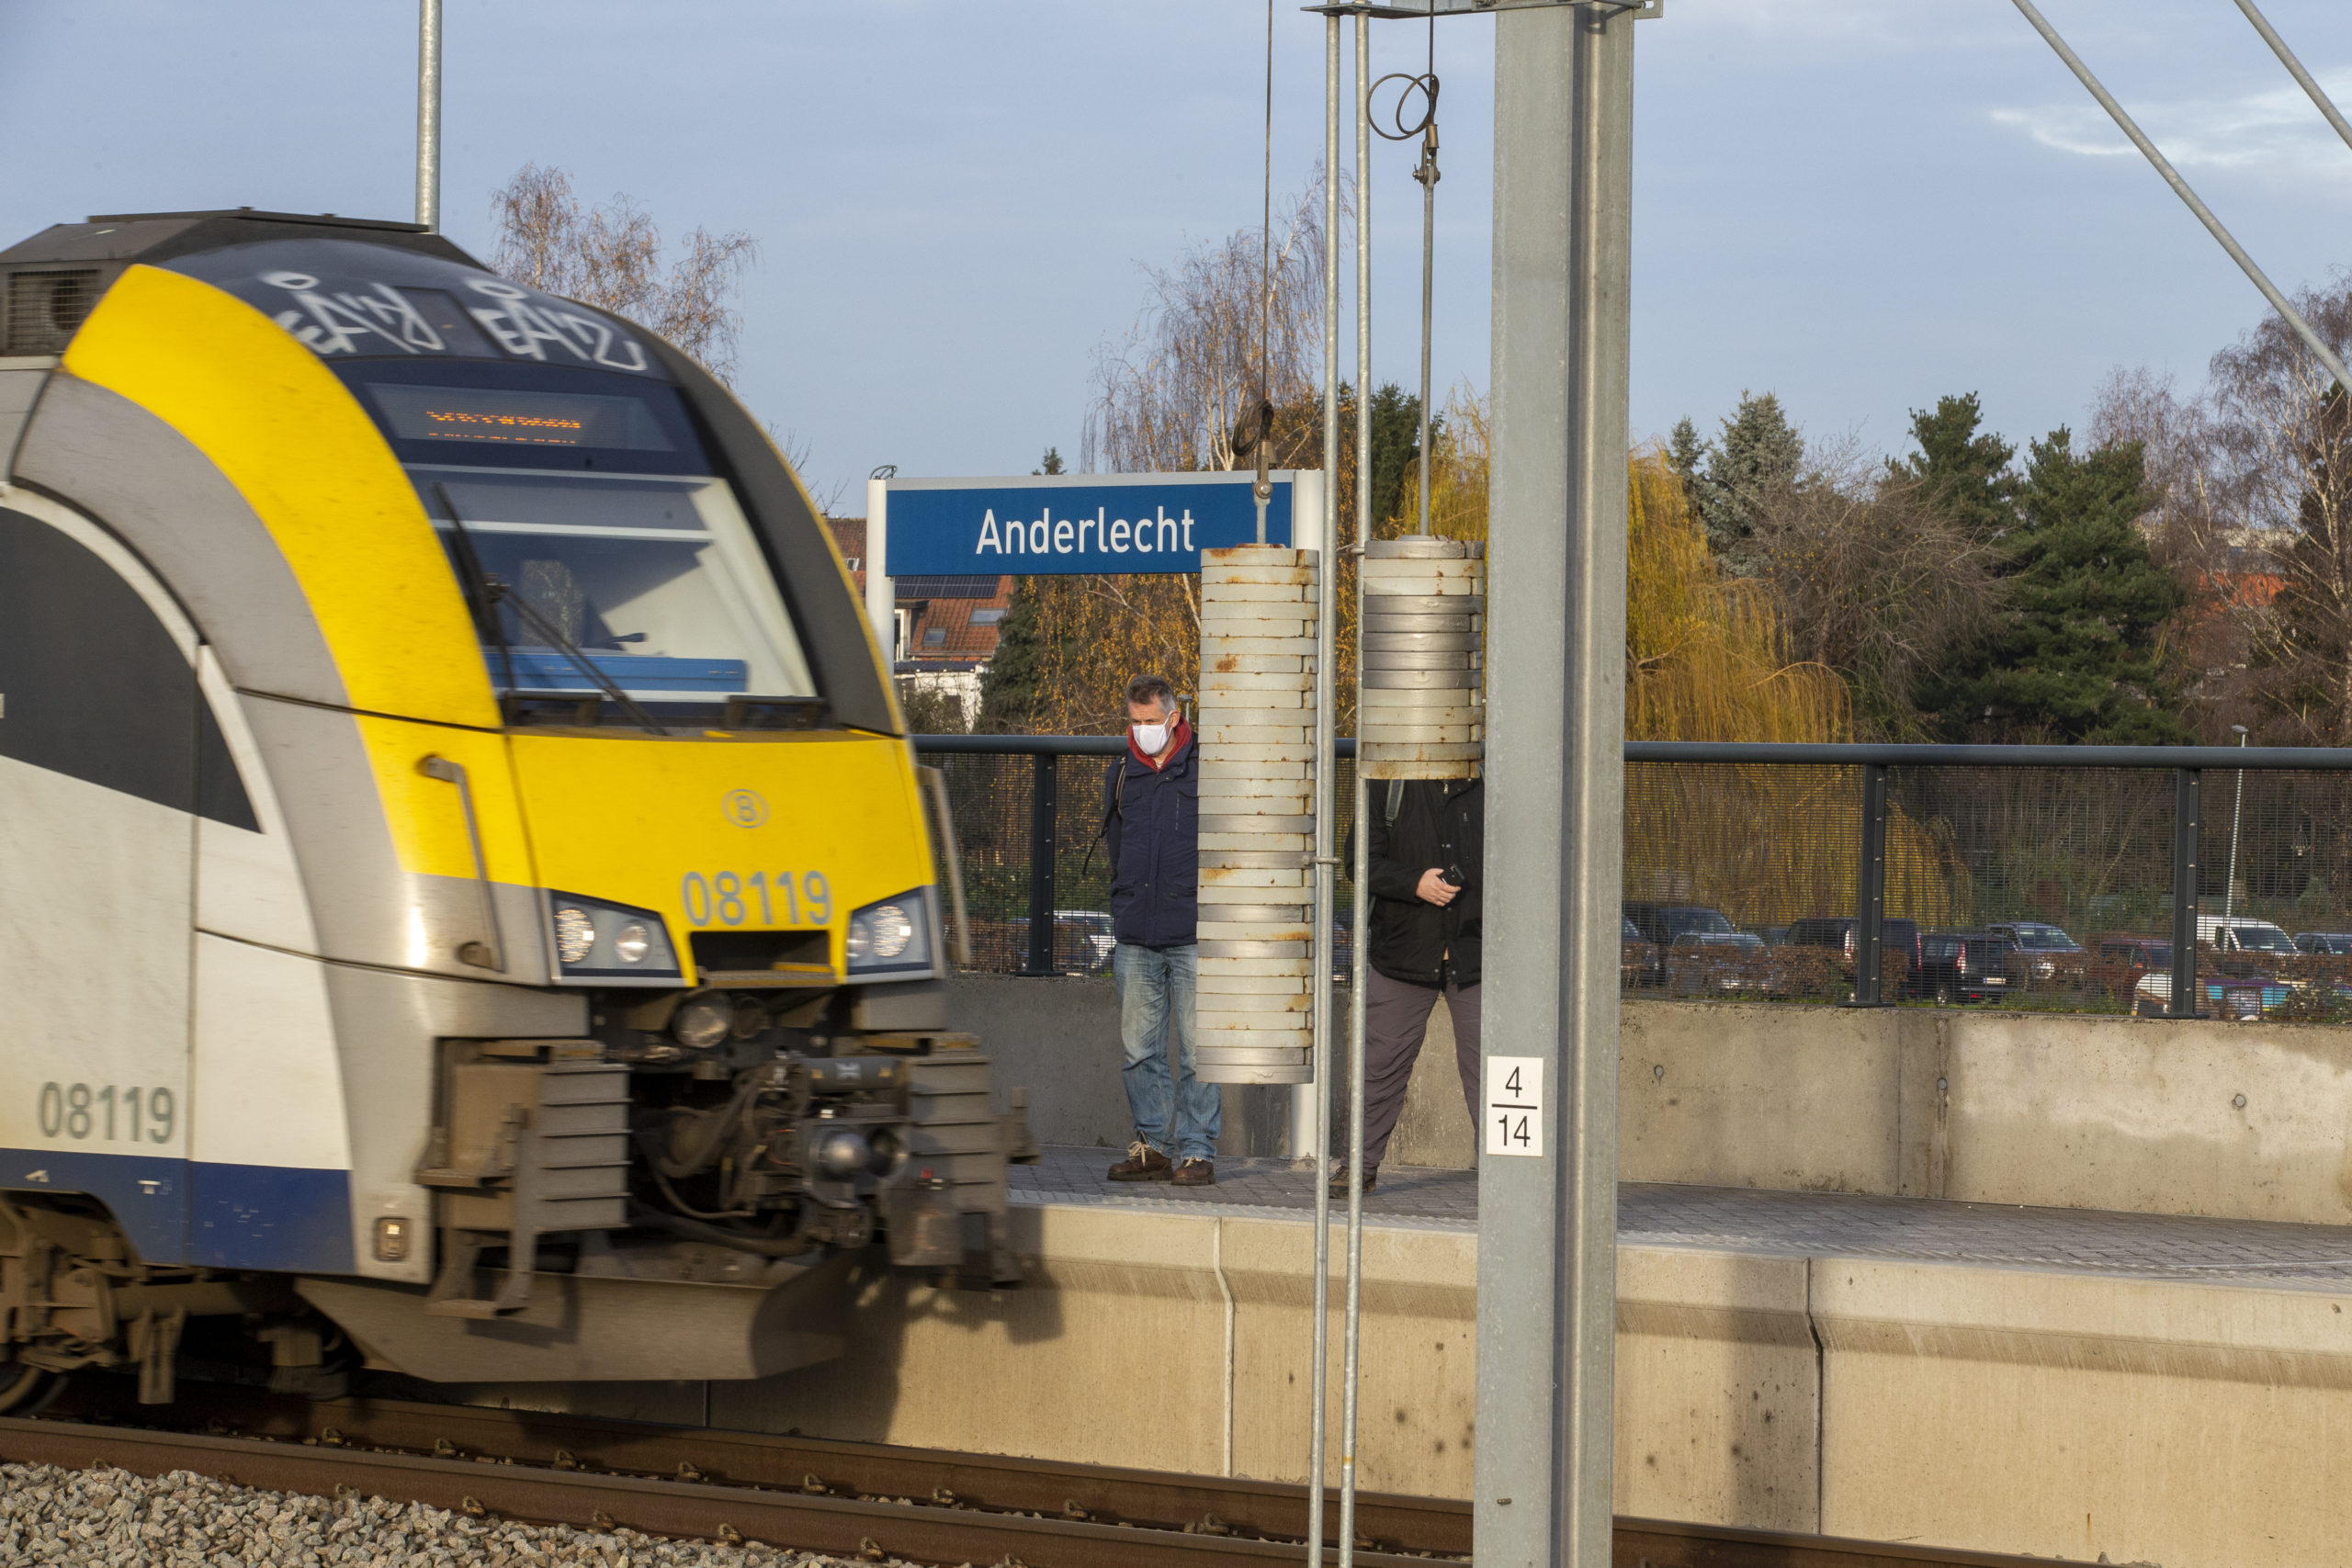 NMBS/SNCB to provide 400 additional trains a week